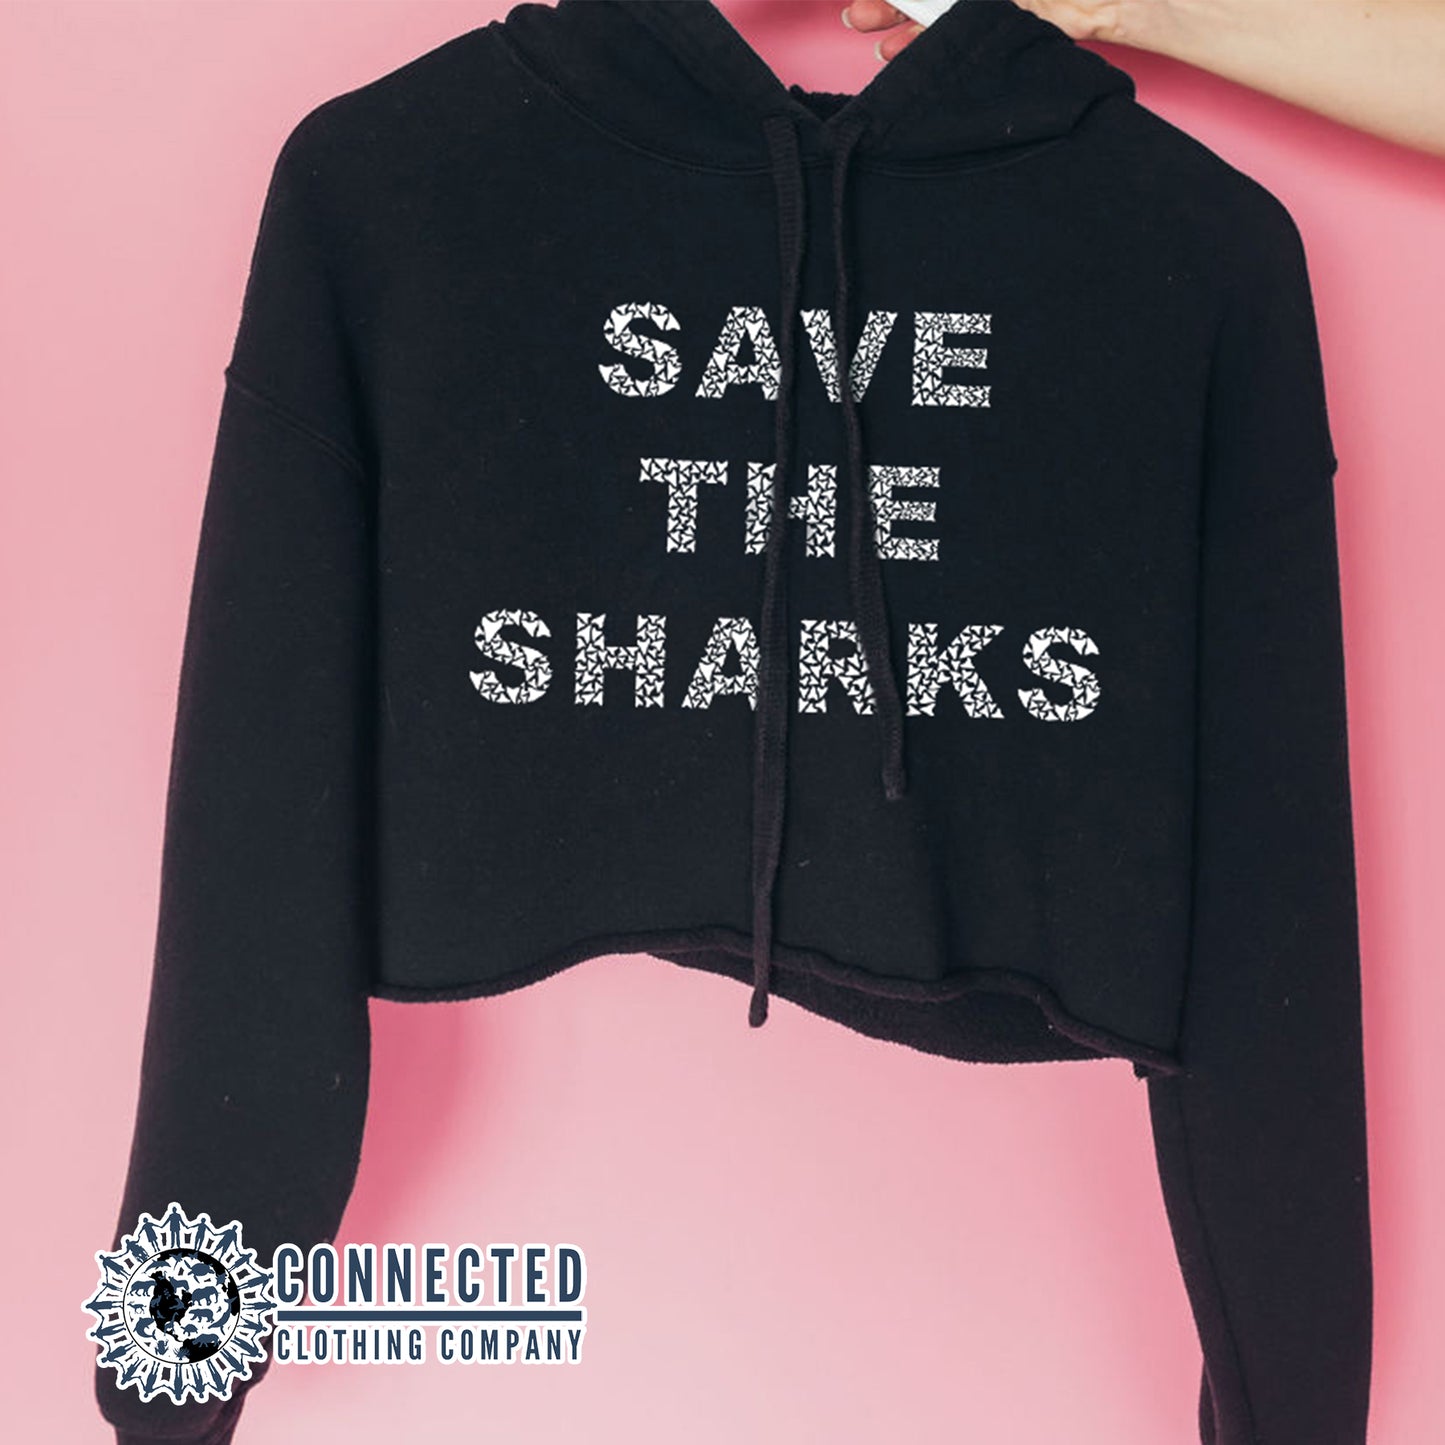 Hand Holding Black Save The Sharks Crop Hoodie - Connected Clothing Company - Ethically and Sustainably Made - 10% donated to Oceana shark conservation